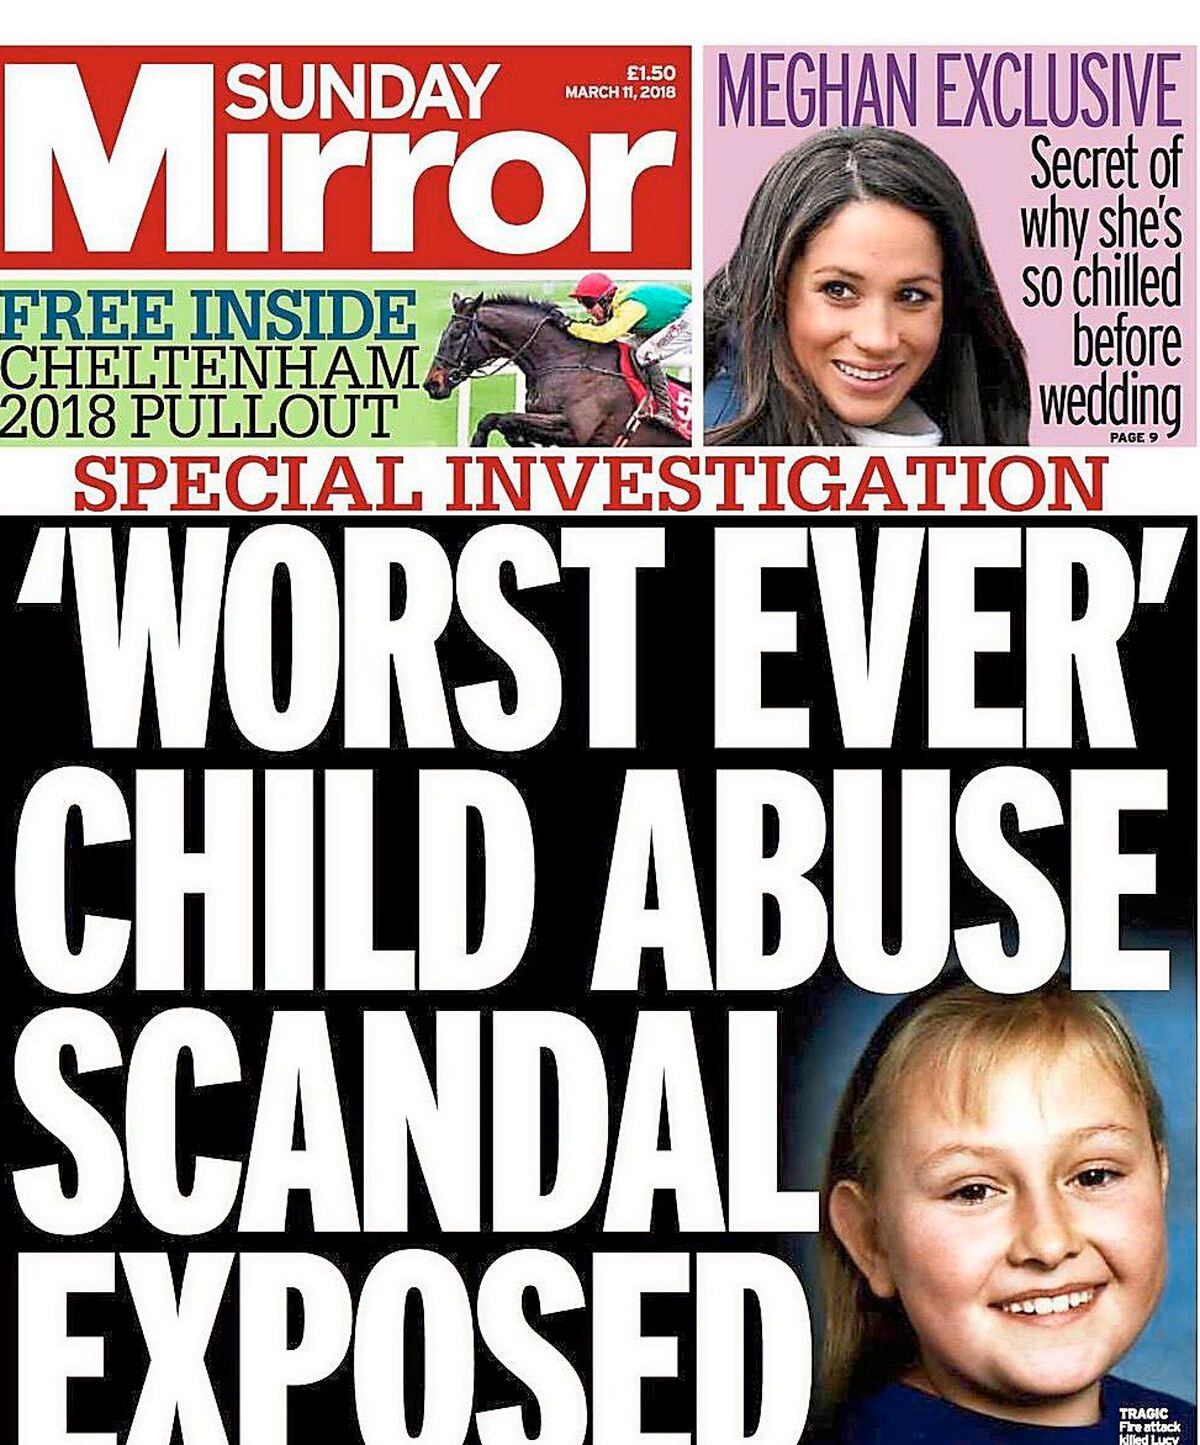 The Sunday Mirror has reported cases going back several years, all of which have been featured in the Shropshire Star